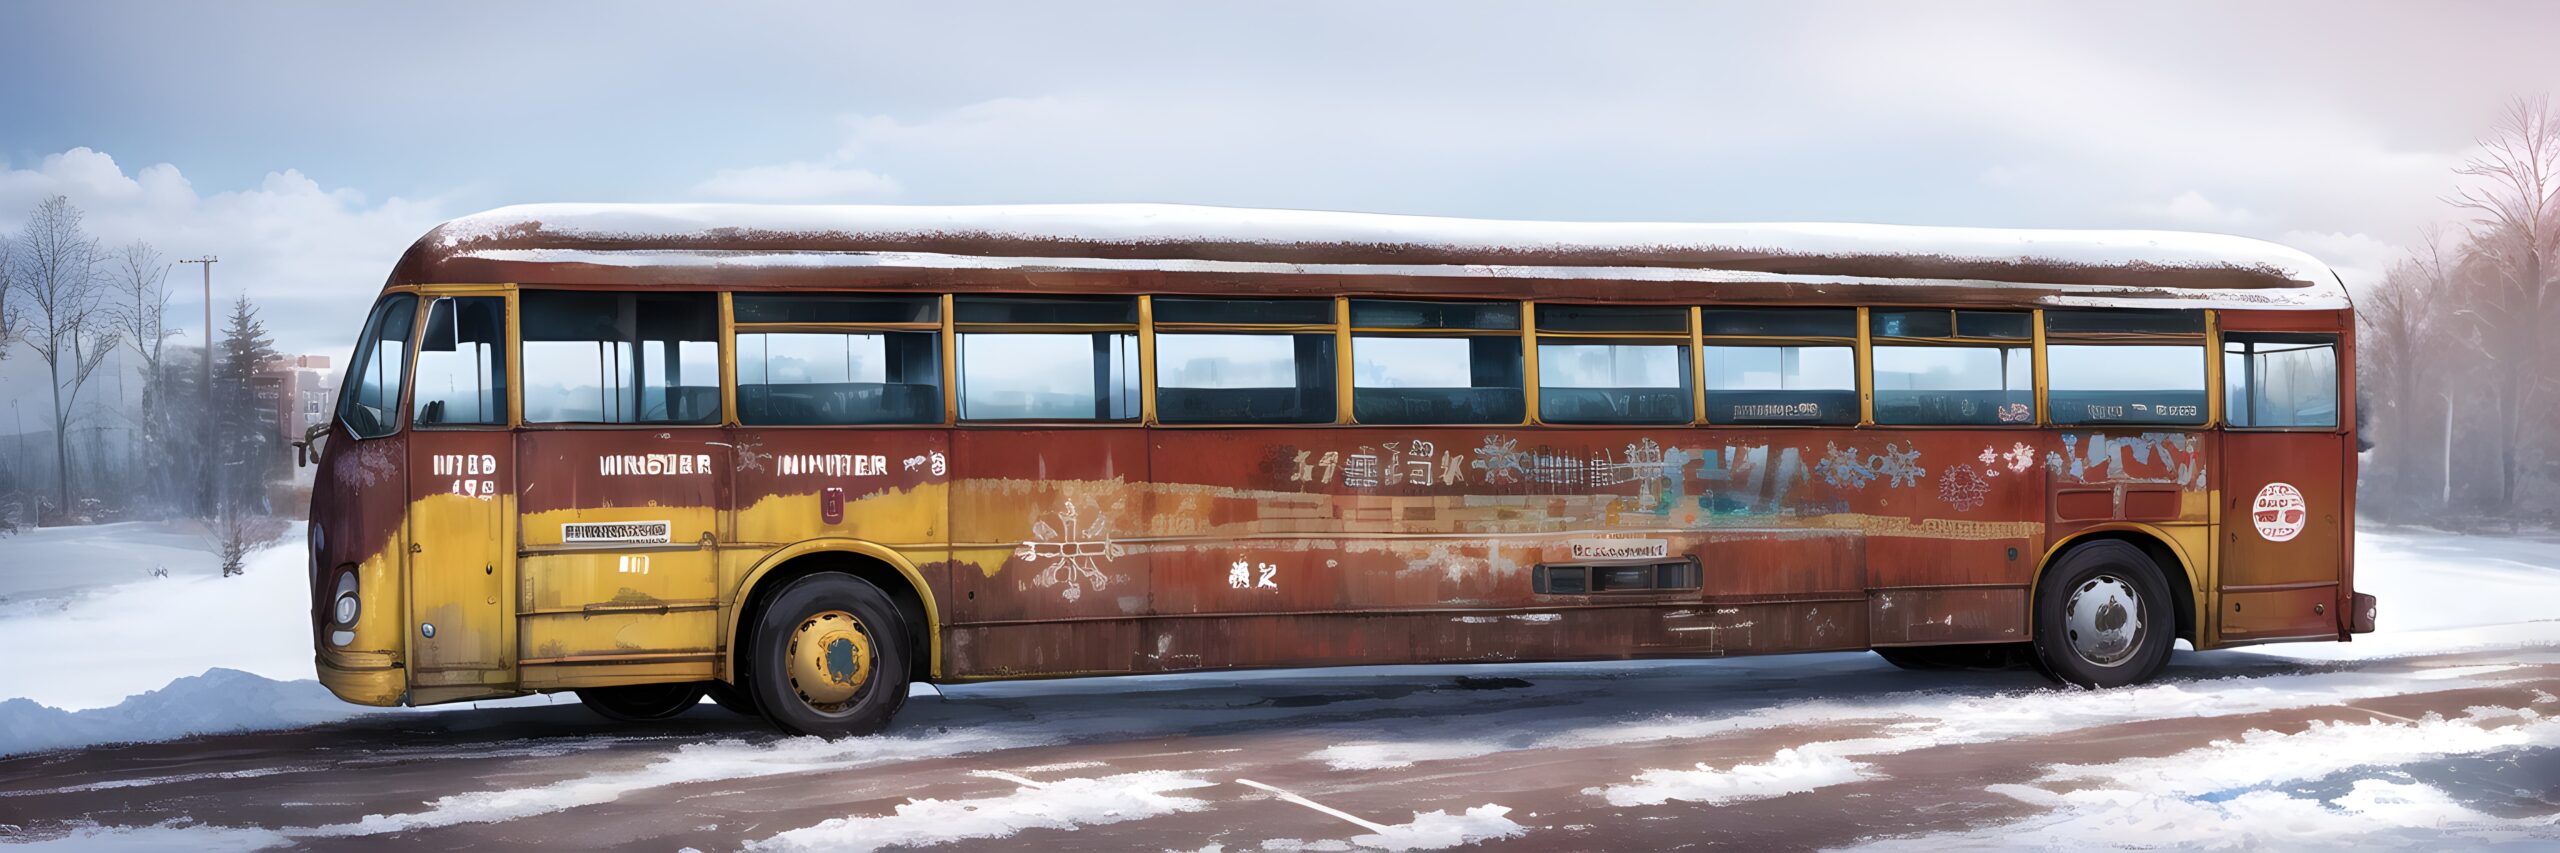 Old and Rusty Bus